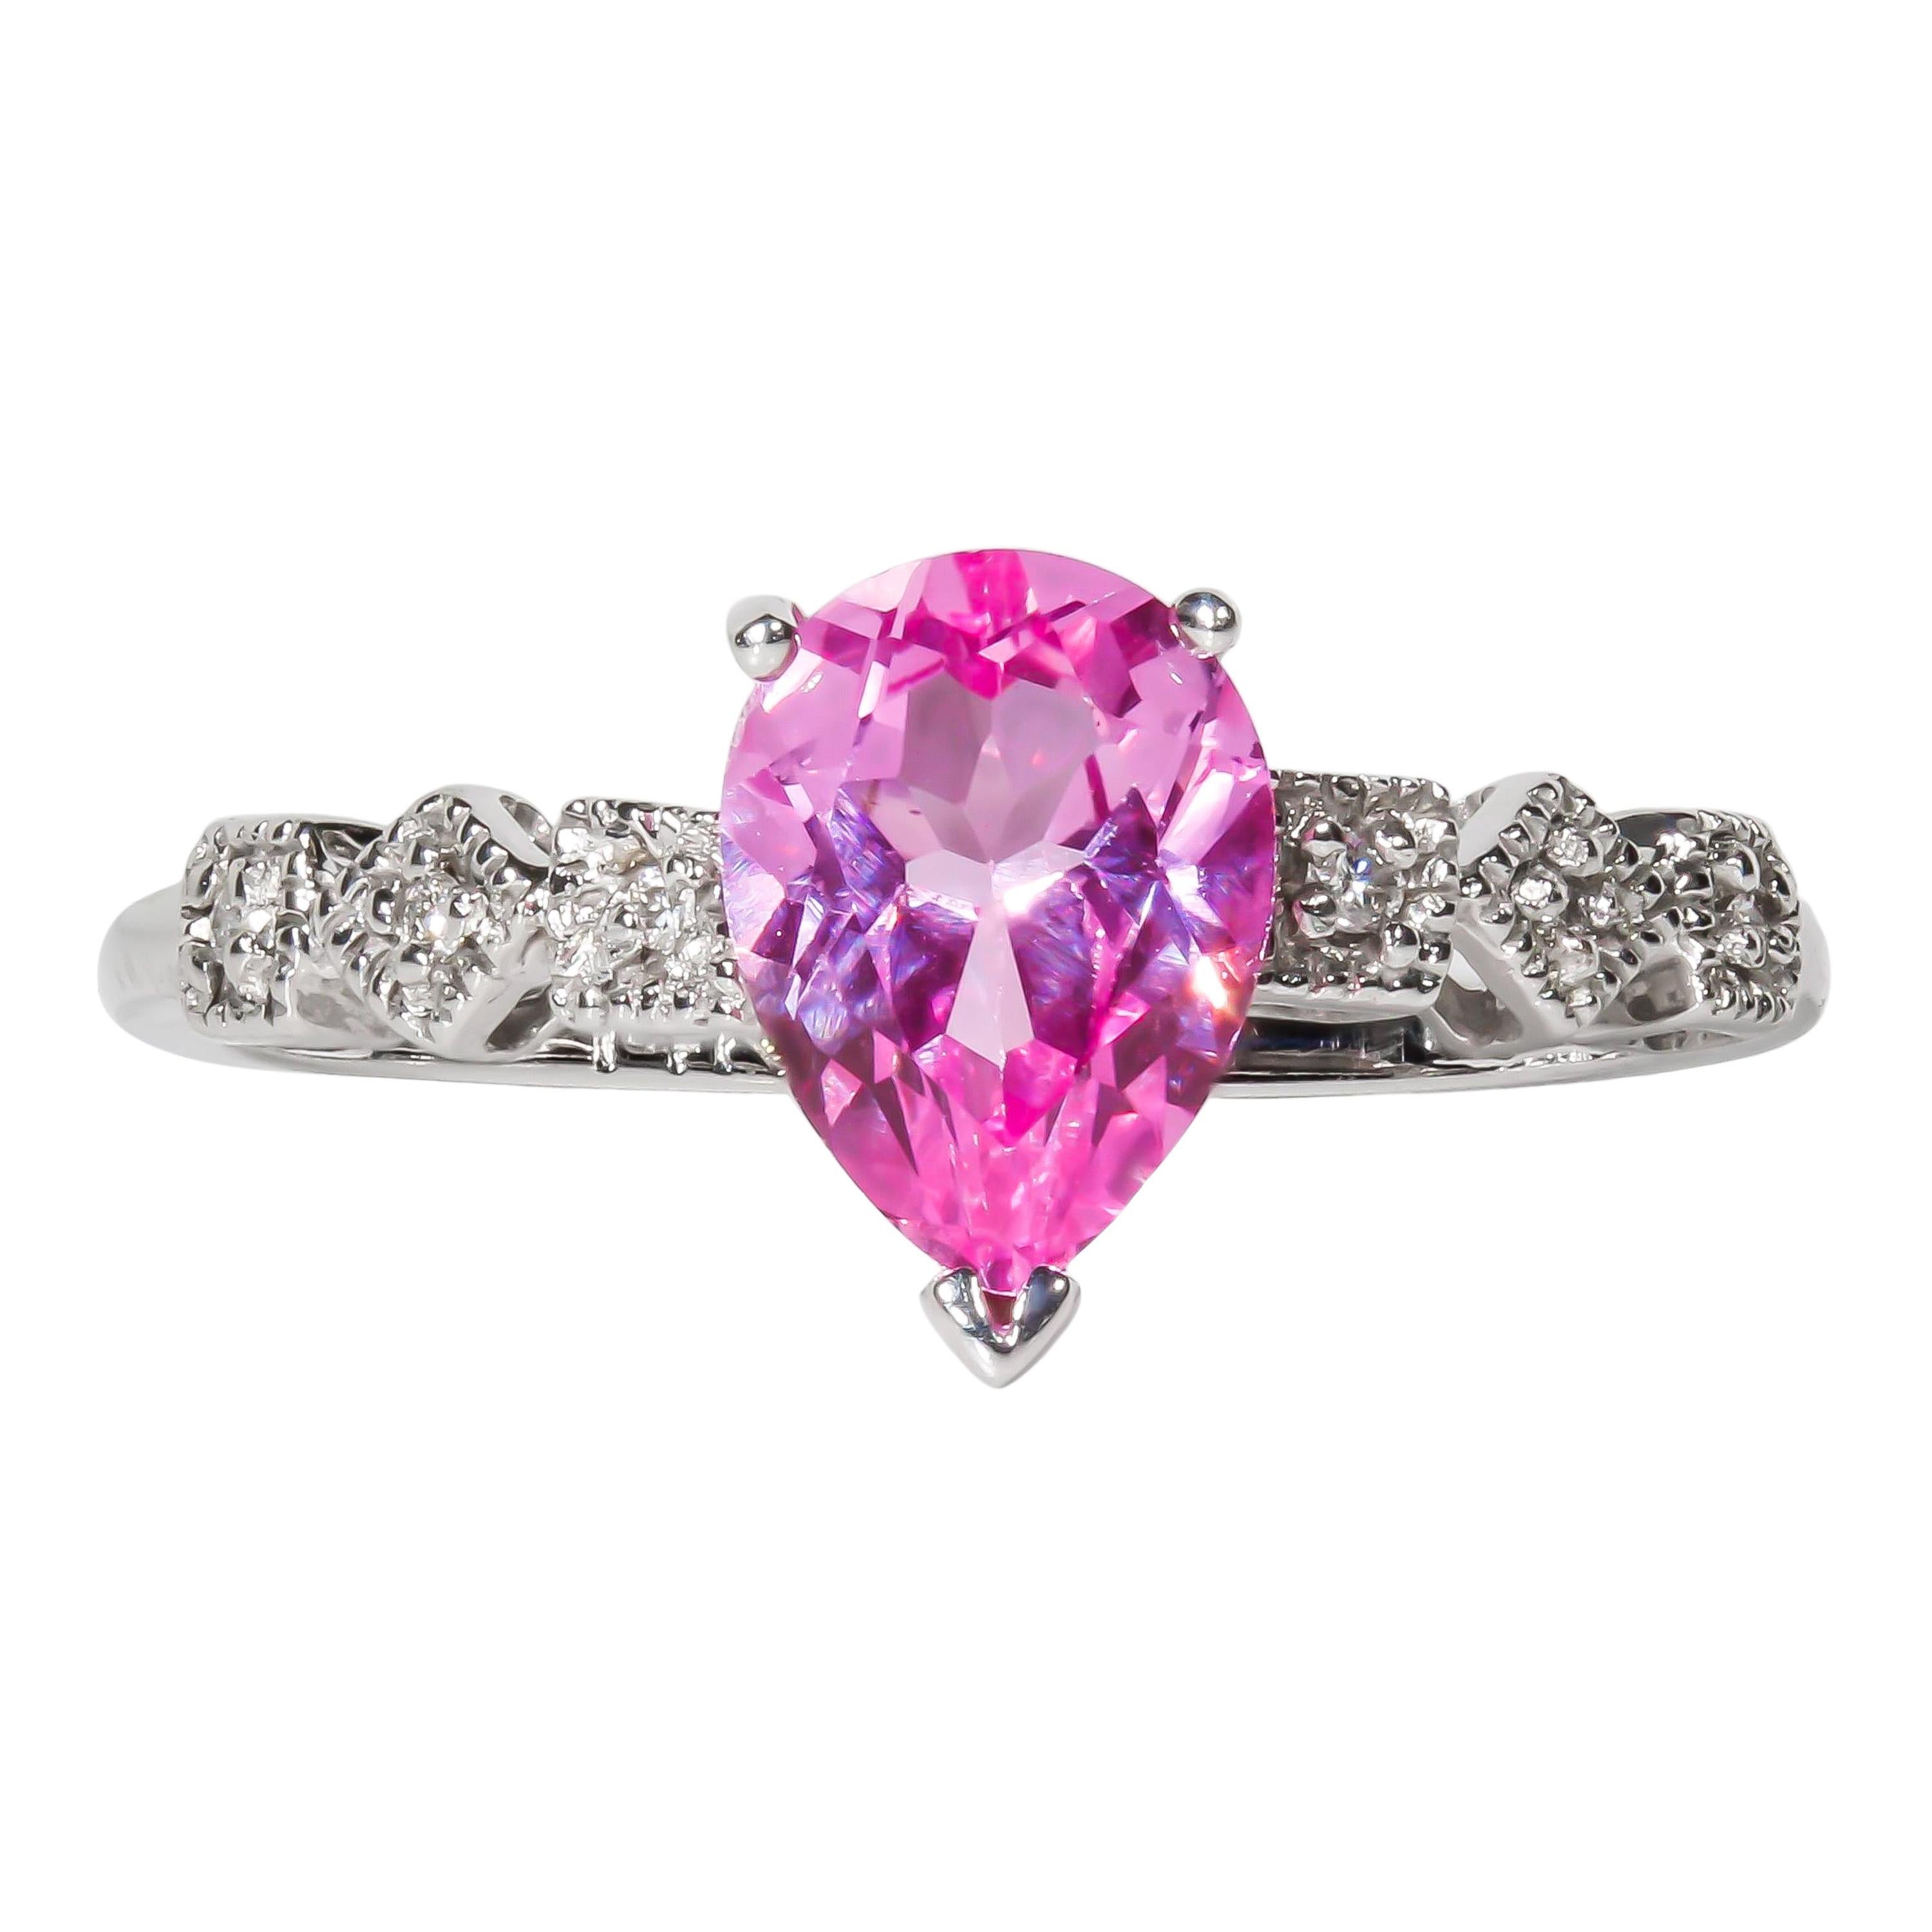 1.50 Carat Pink Topaz and Diamond Cocktail Ring